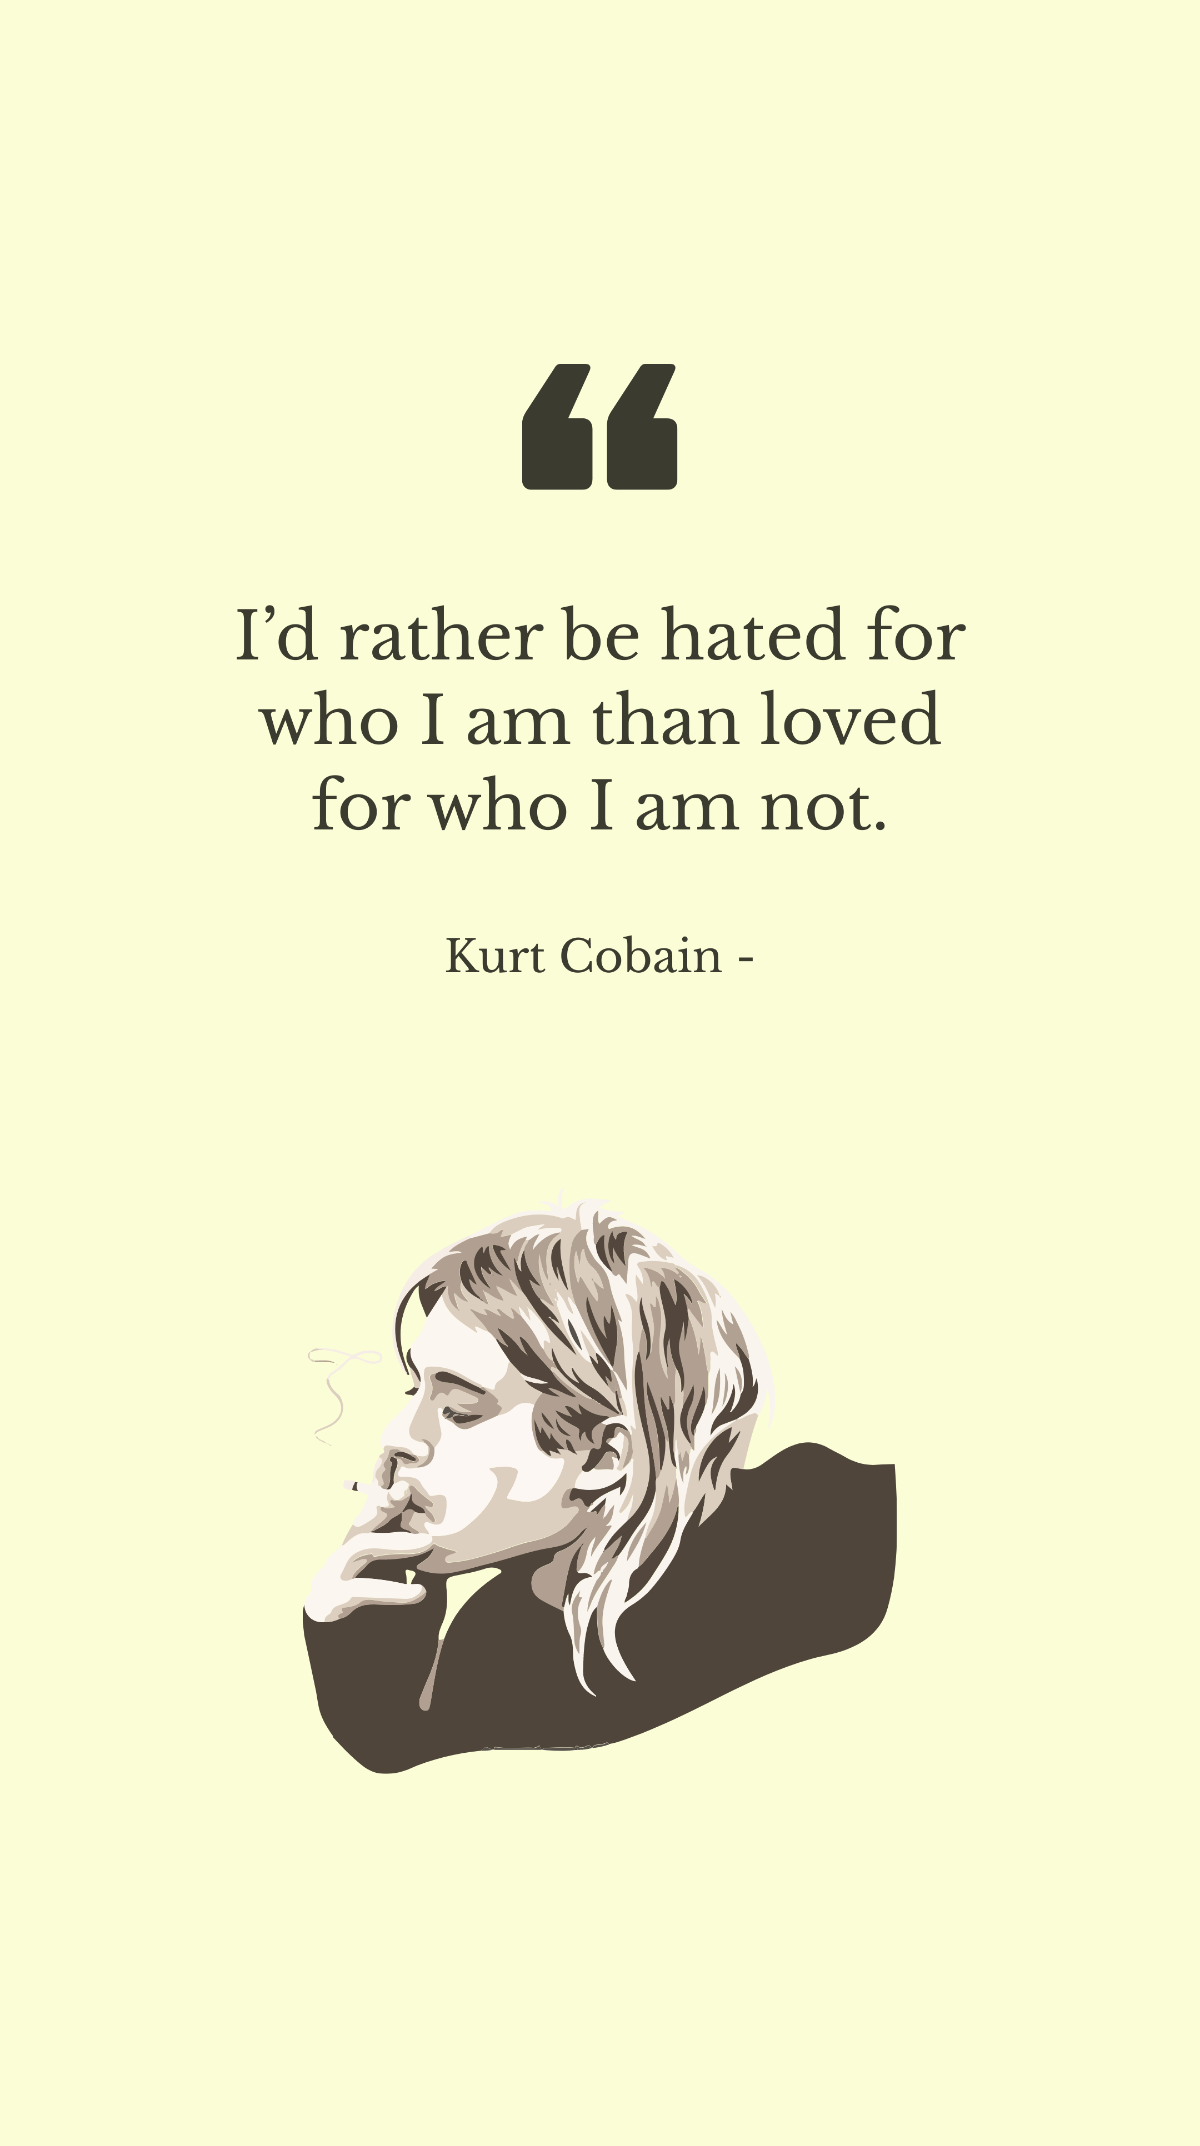 Kurt Cobain - I’d rather be hated for who I am than loved for who I am not. Template